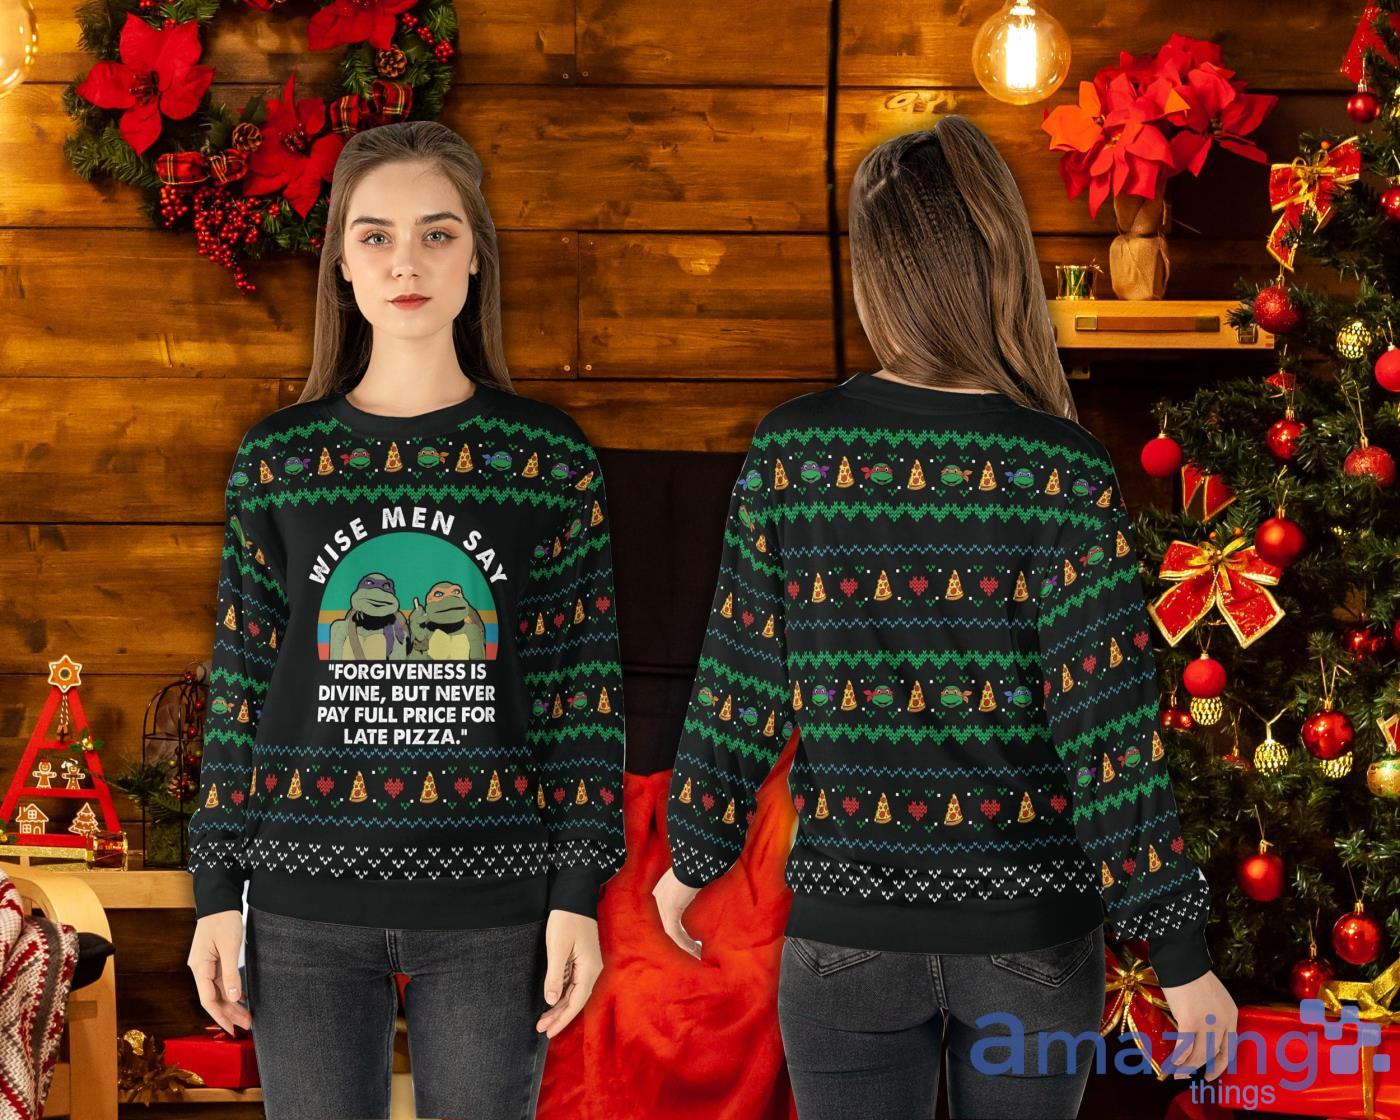 https://image.whatamazingthings.com/2022/10/ninja-turtles-wise-men-say-wise-men-say-forgiveness-is-divine-but-never-pay-ugly-christmas-sweater.jpg